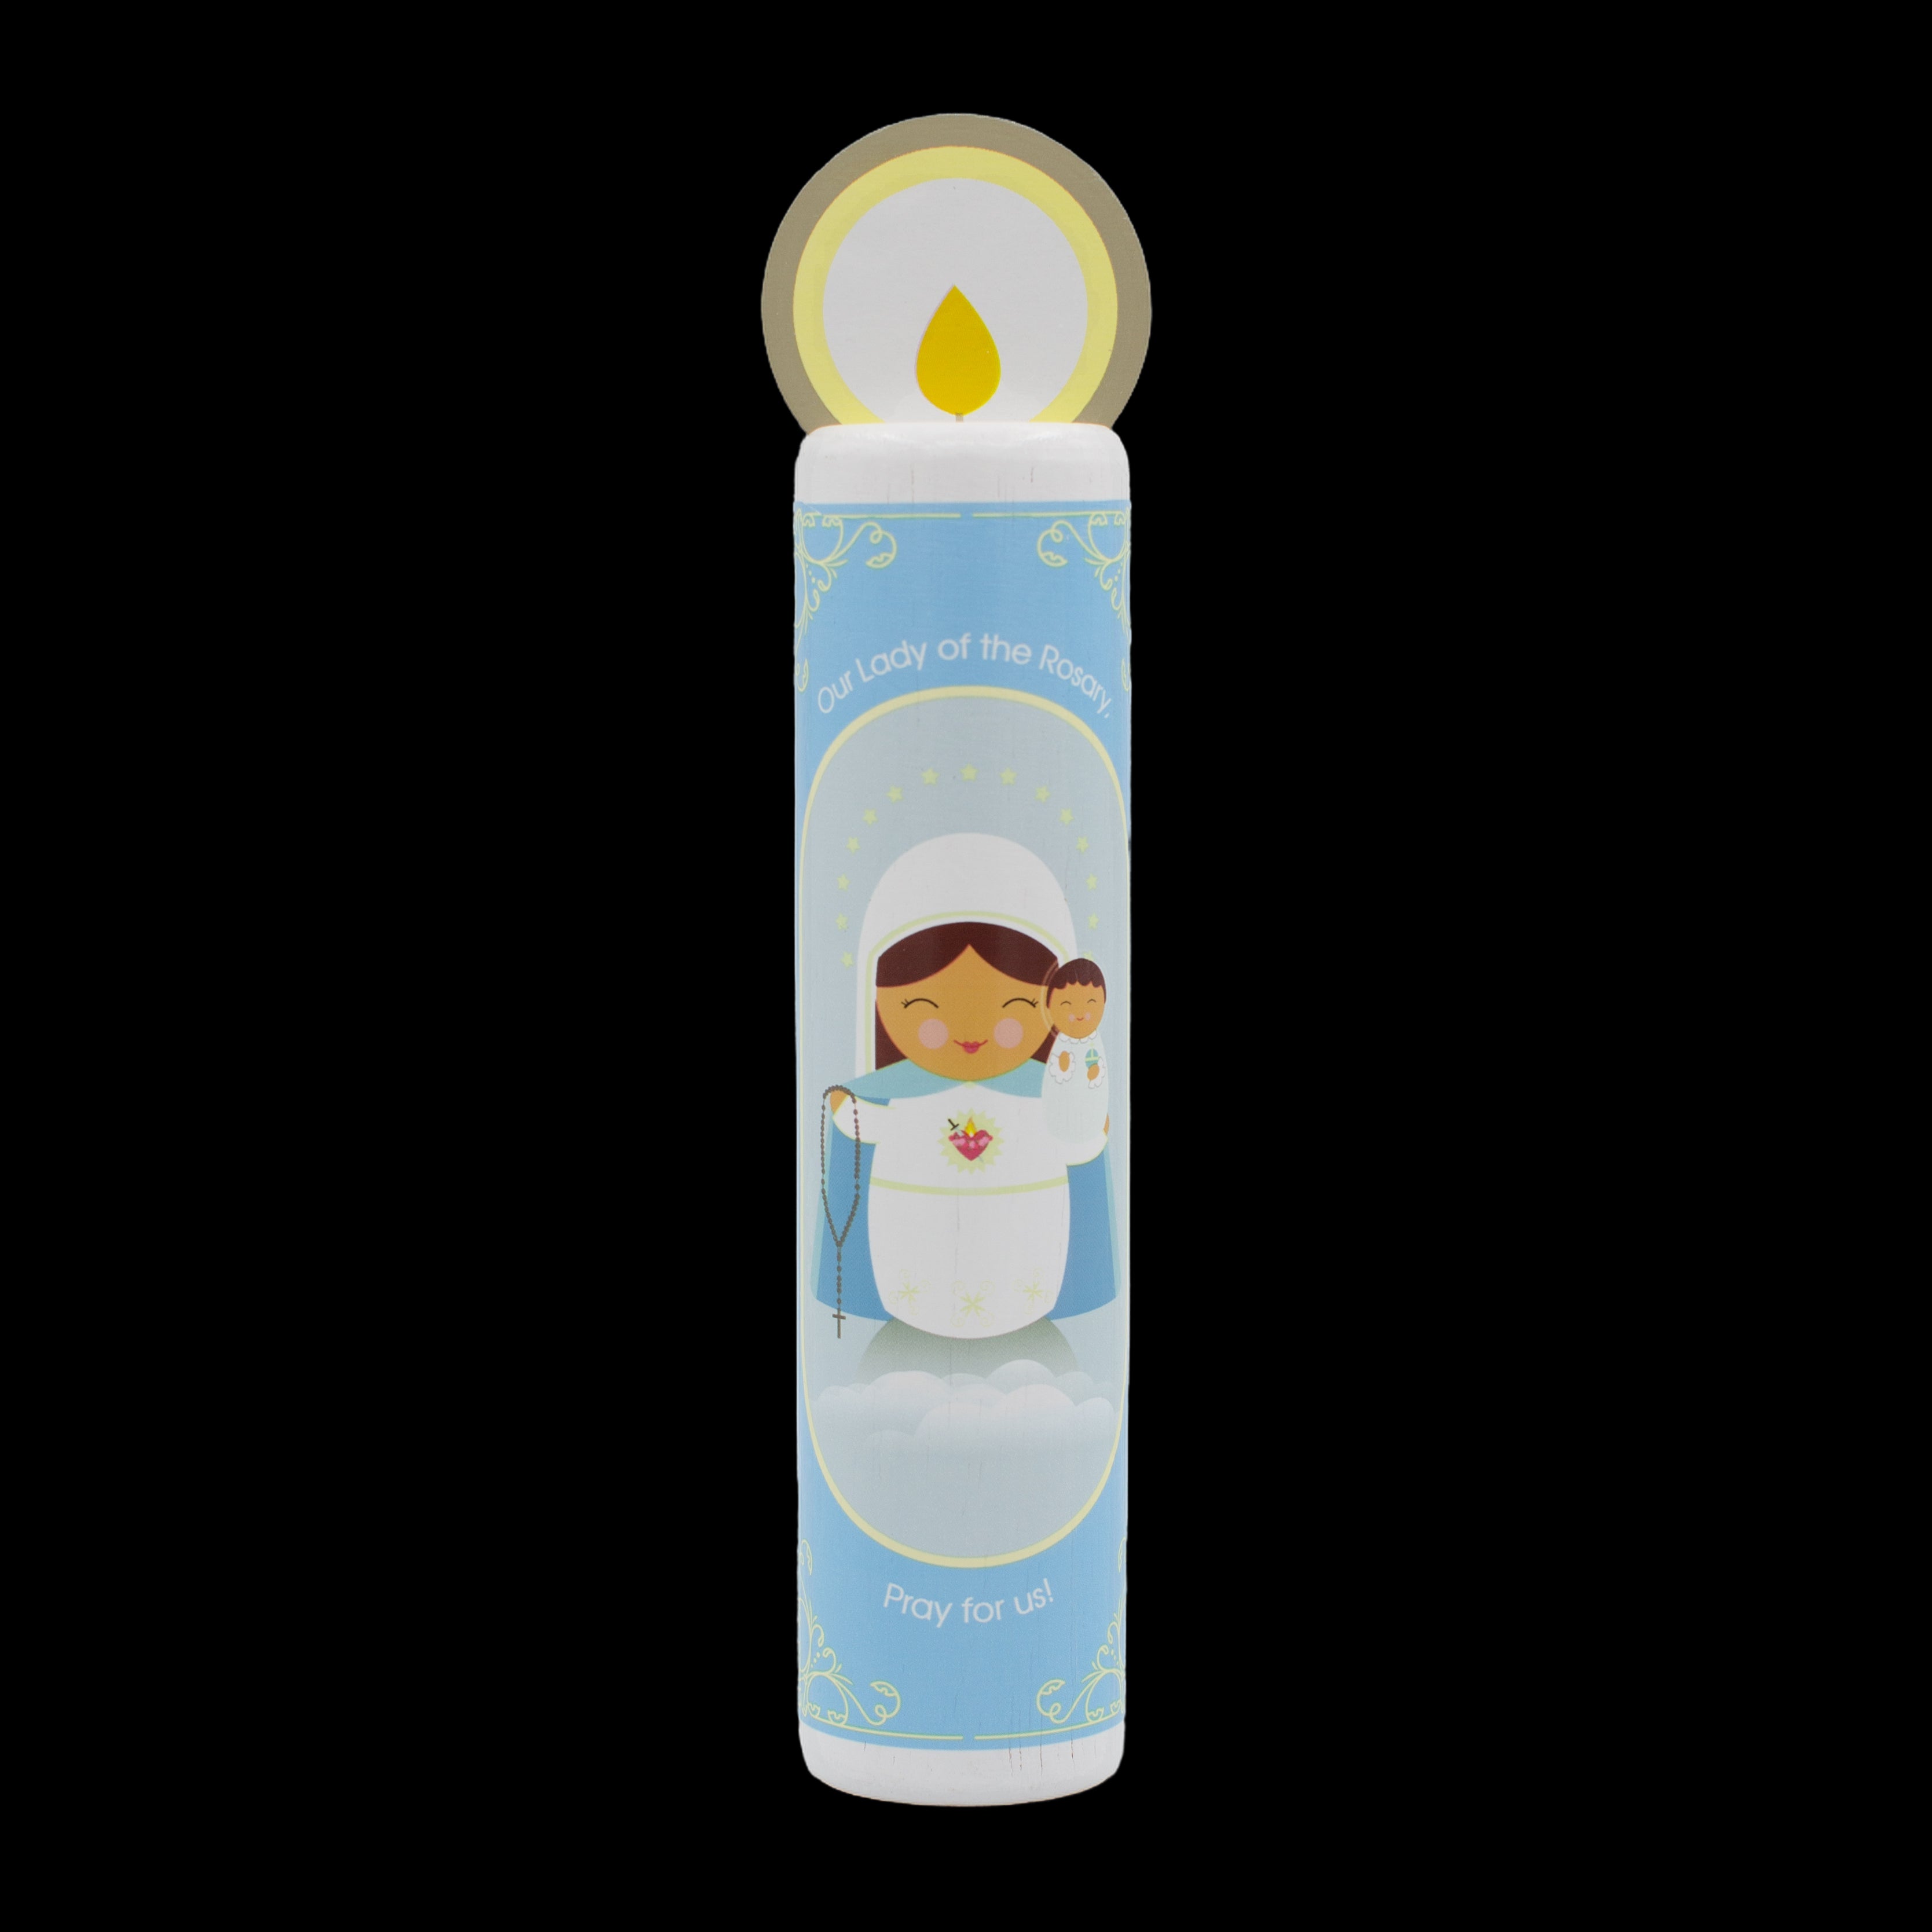 Our Lady Of The Rosary (hail Mary) Wooden Prayer Candle